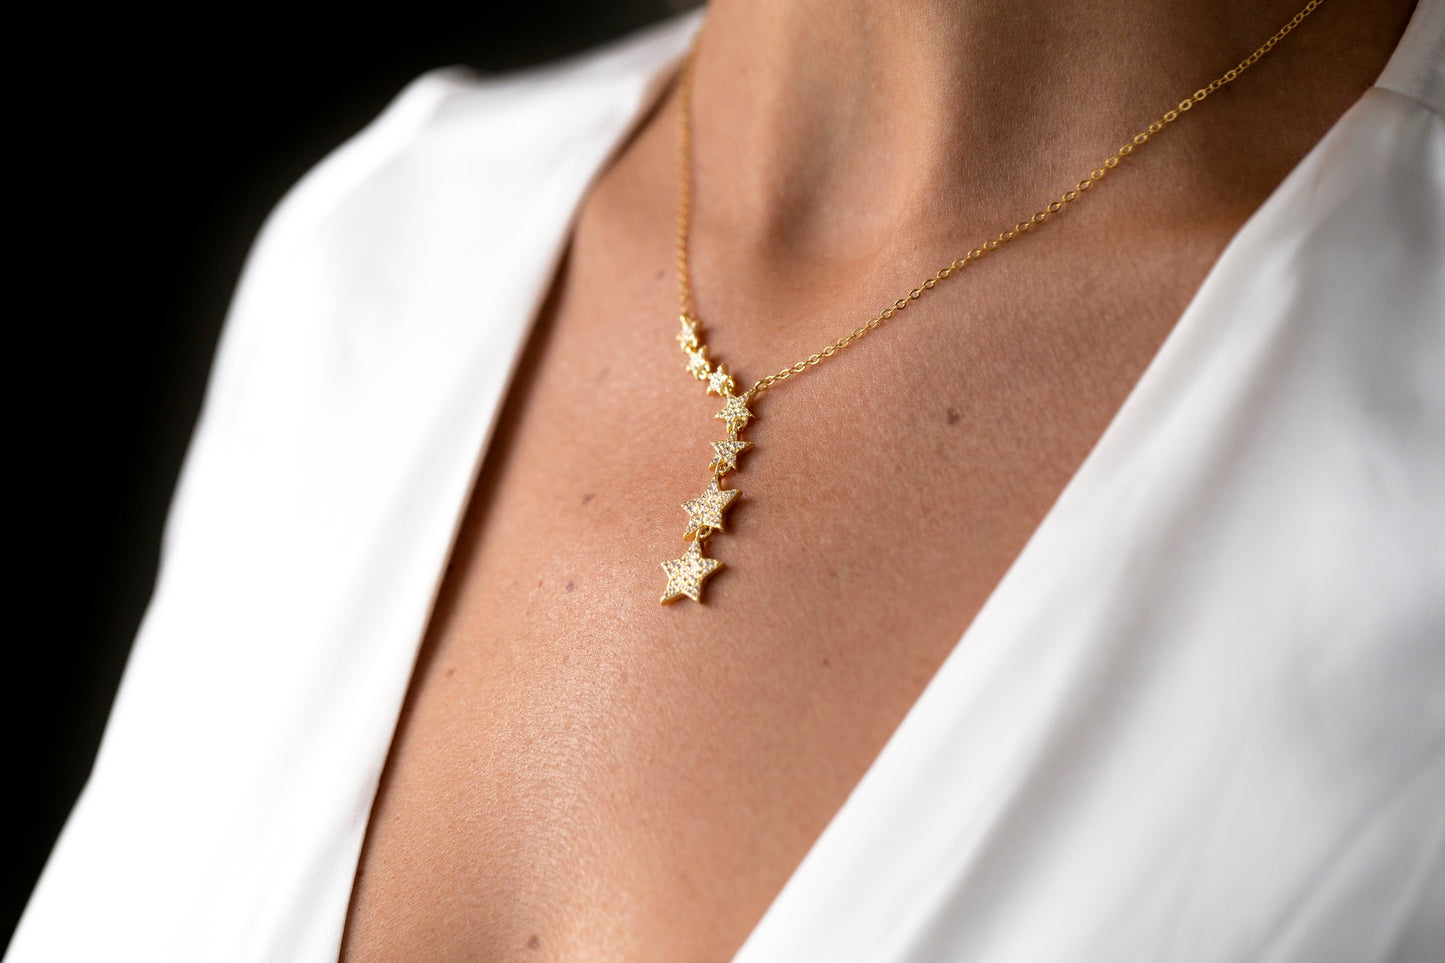 Falling Stars necklace